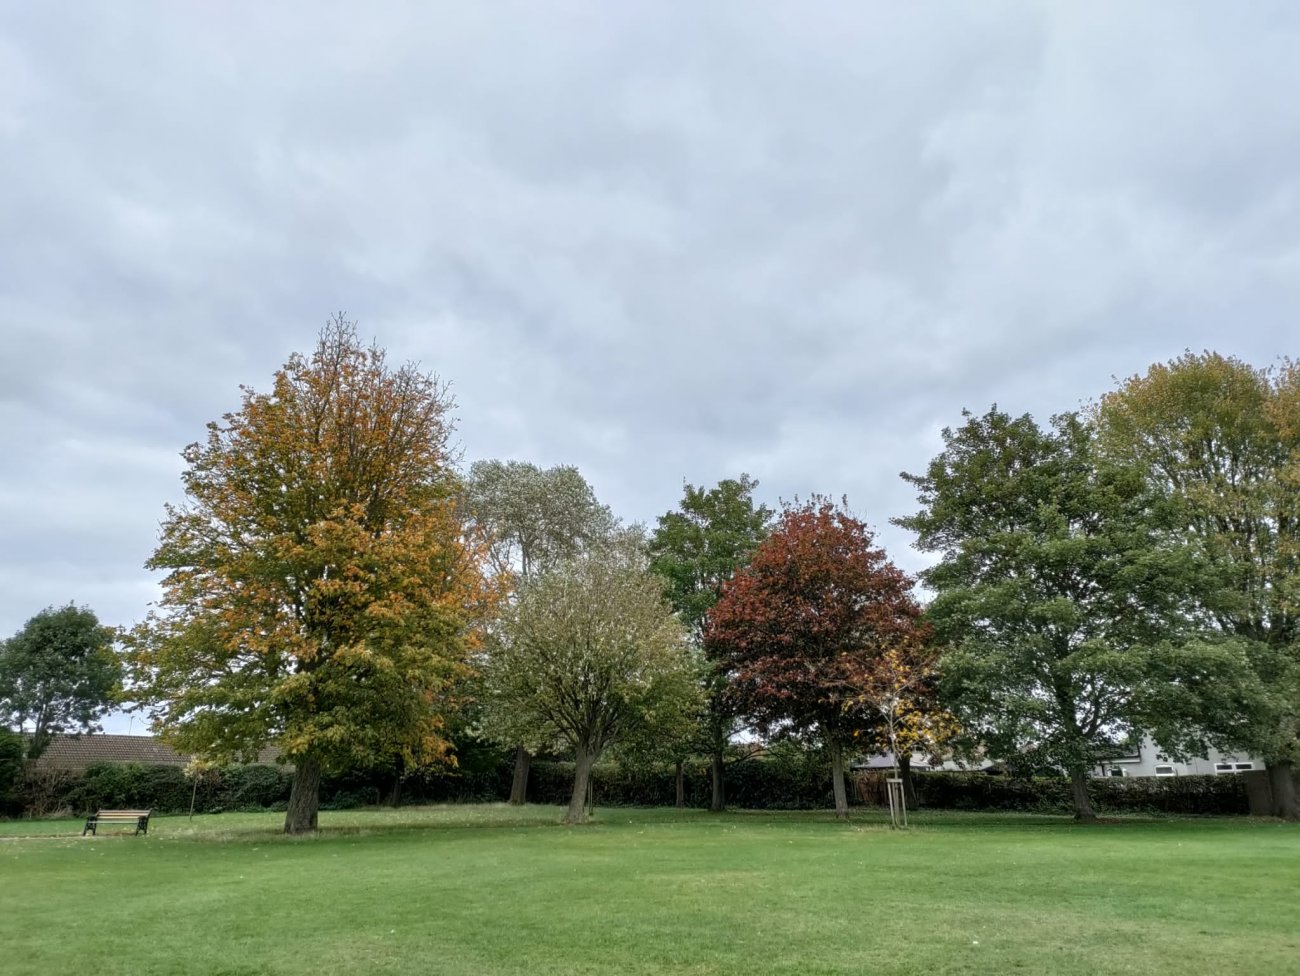 Photograph of Autumn trees in Brunswood Park